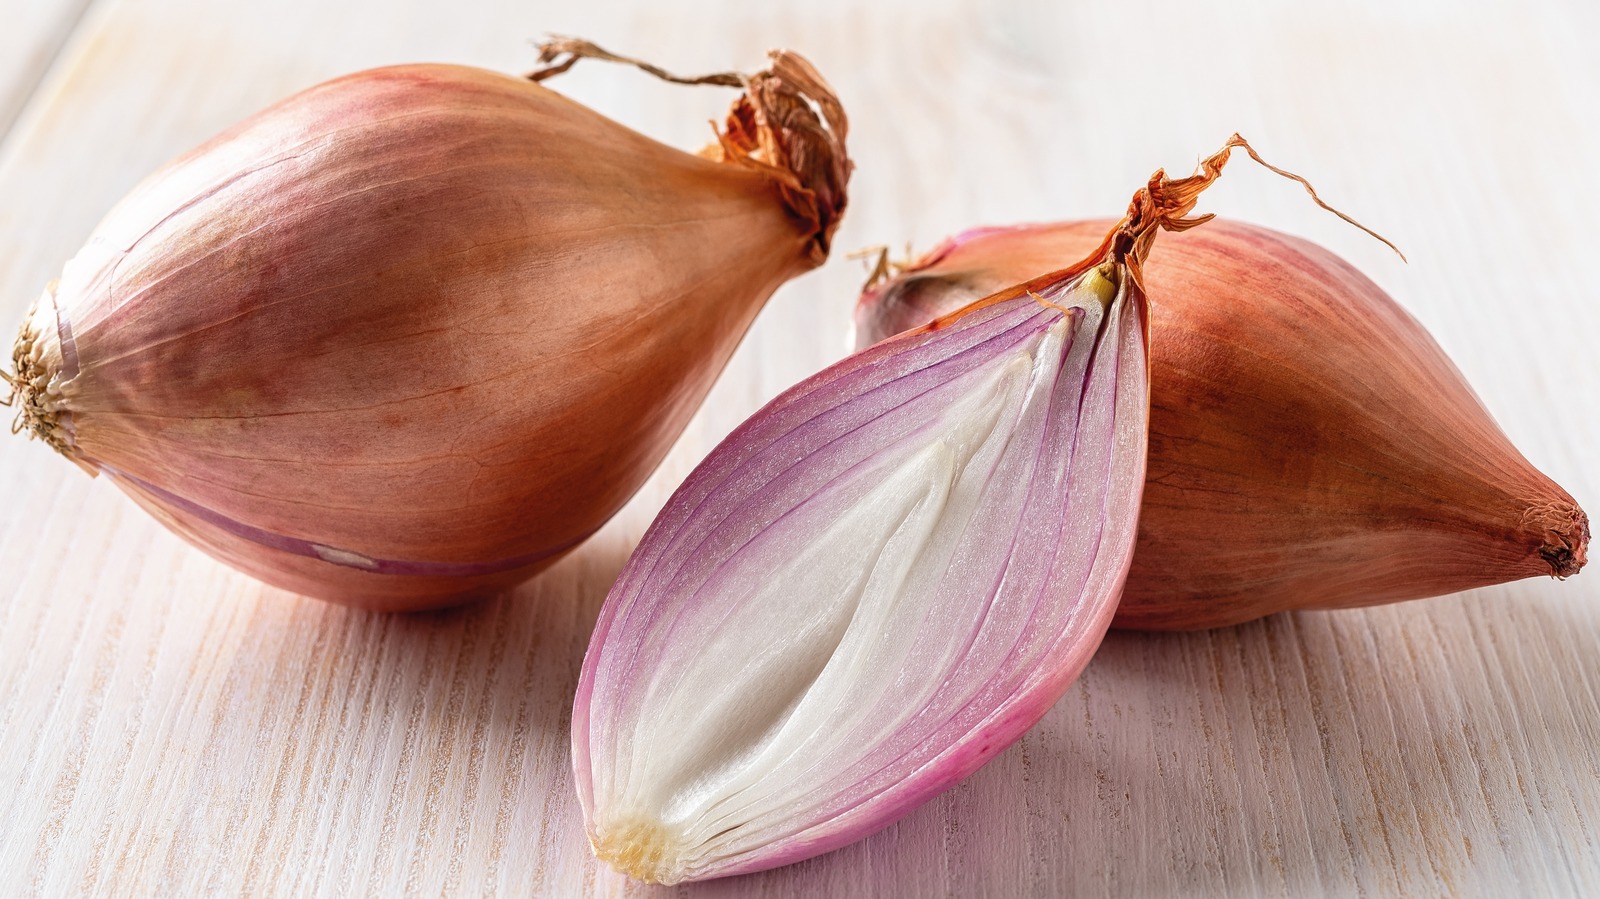 Are onions a good substitute for shallots? - Quora